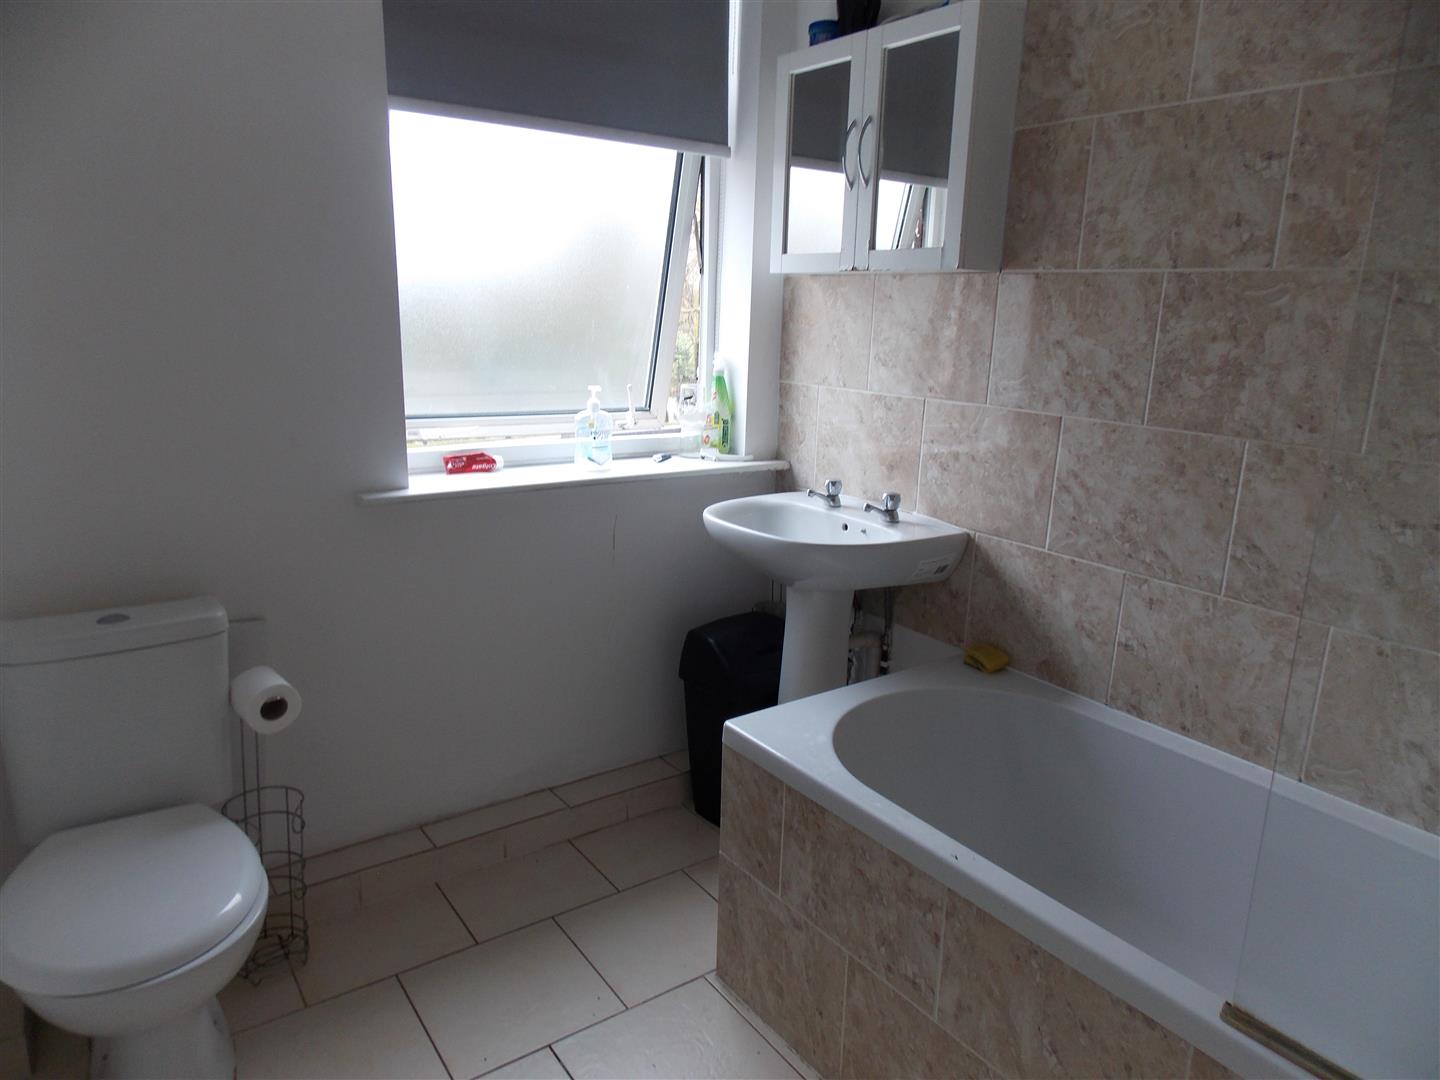 1 bed  to rent in Long Eaton  - Property Image 7